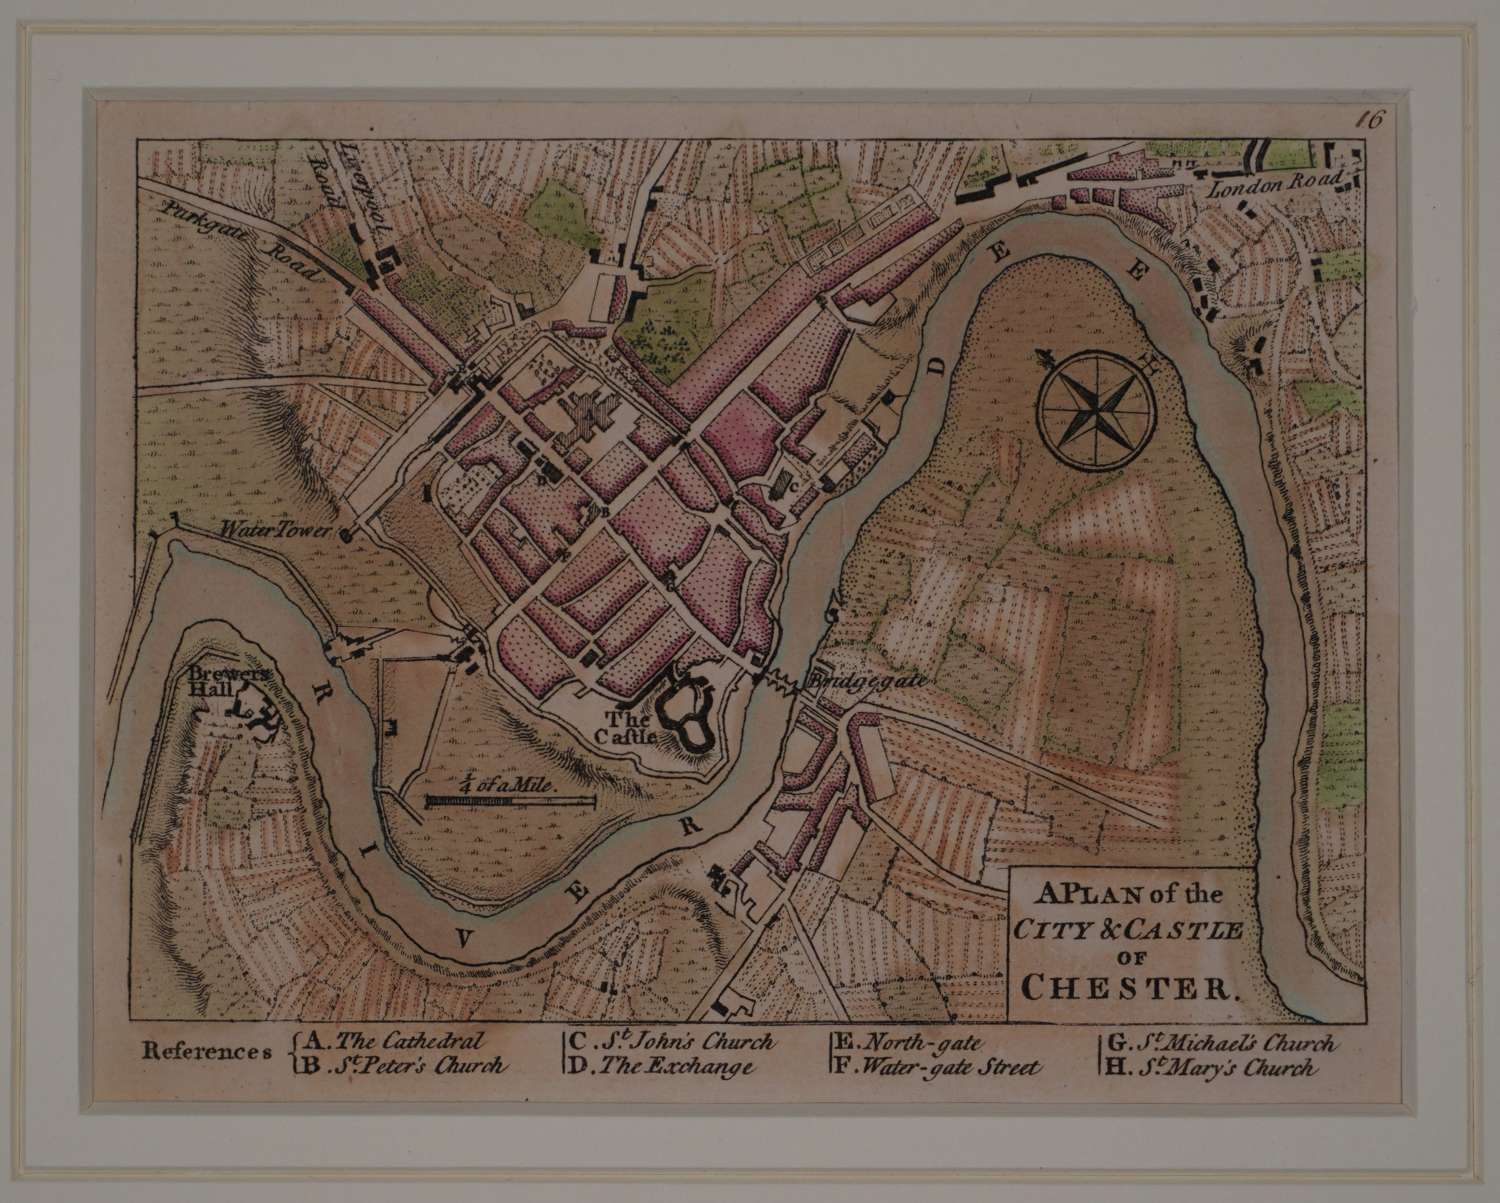 A Plan of the City and Castle of Chester by Andrew Dury